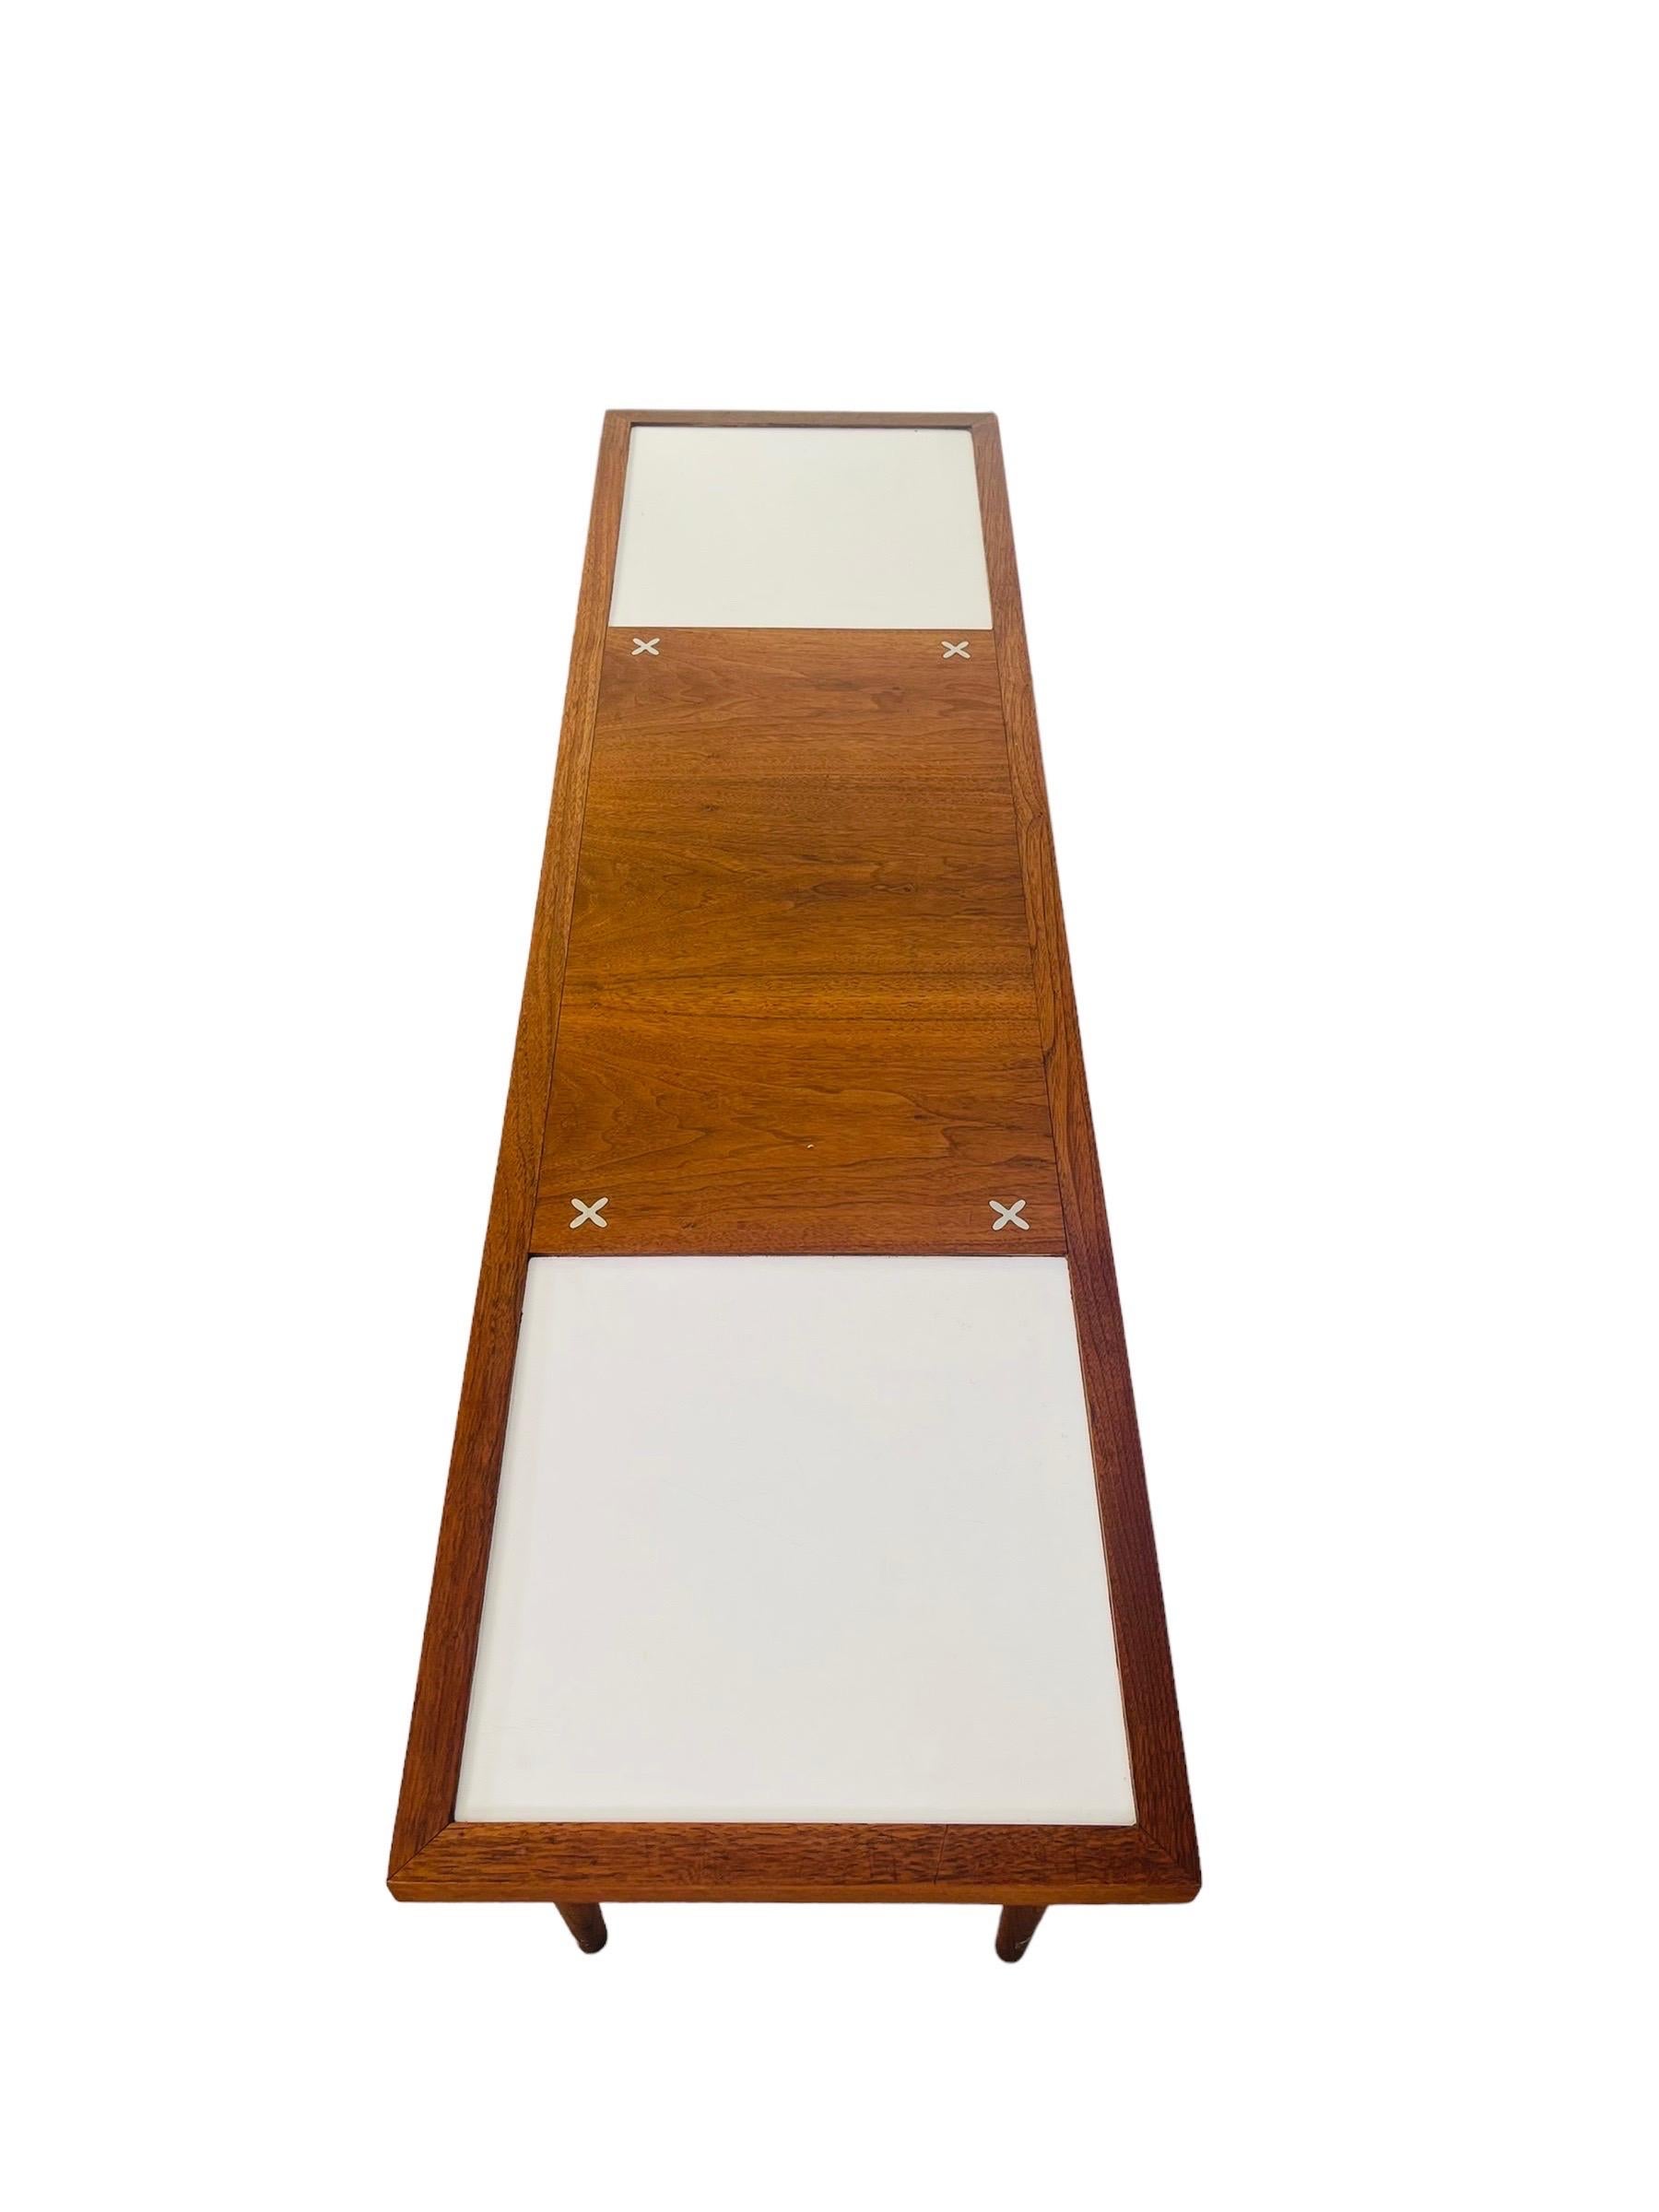 Mid-Century Modern walnut & laminate coffee table with 6 gorgeous tapered legs by American Martinsville. This X-Line is widely popular because of the four X inlay on top. This beautiful table has two square white laminate cube on each end which adds